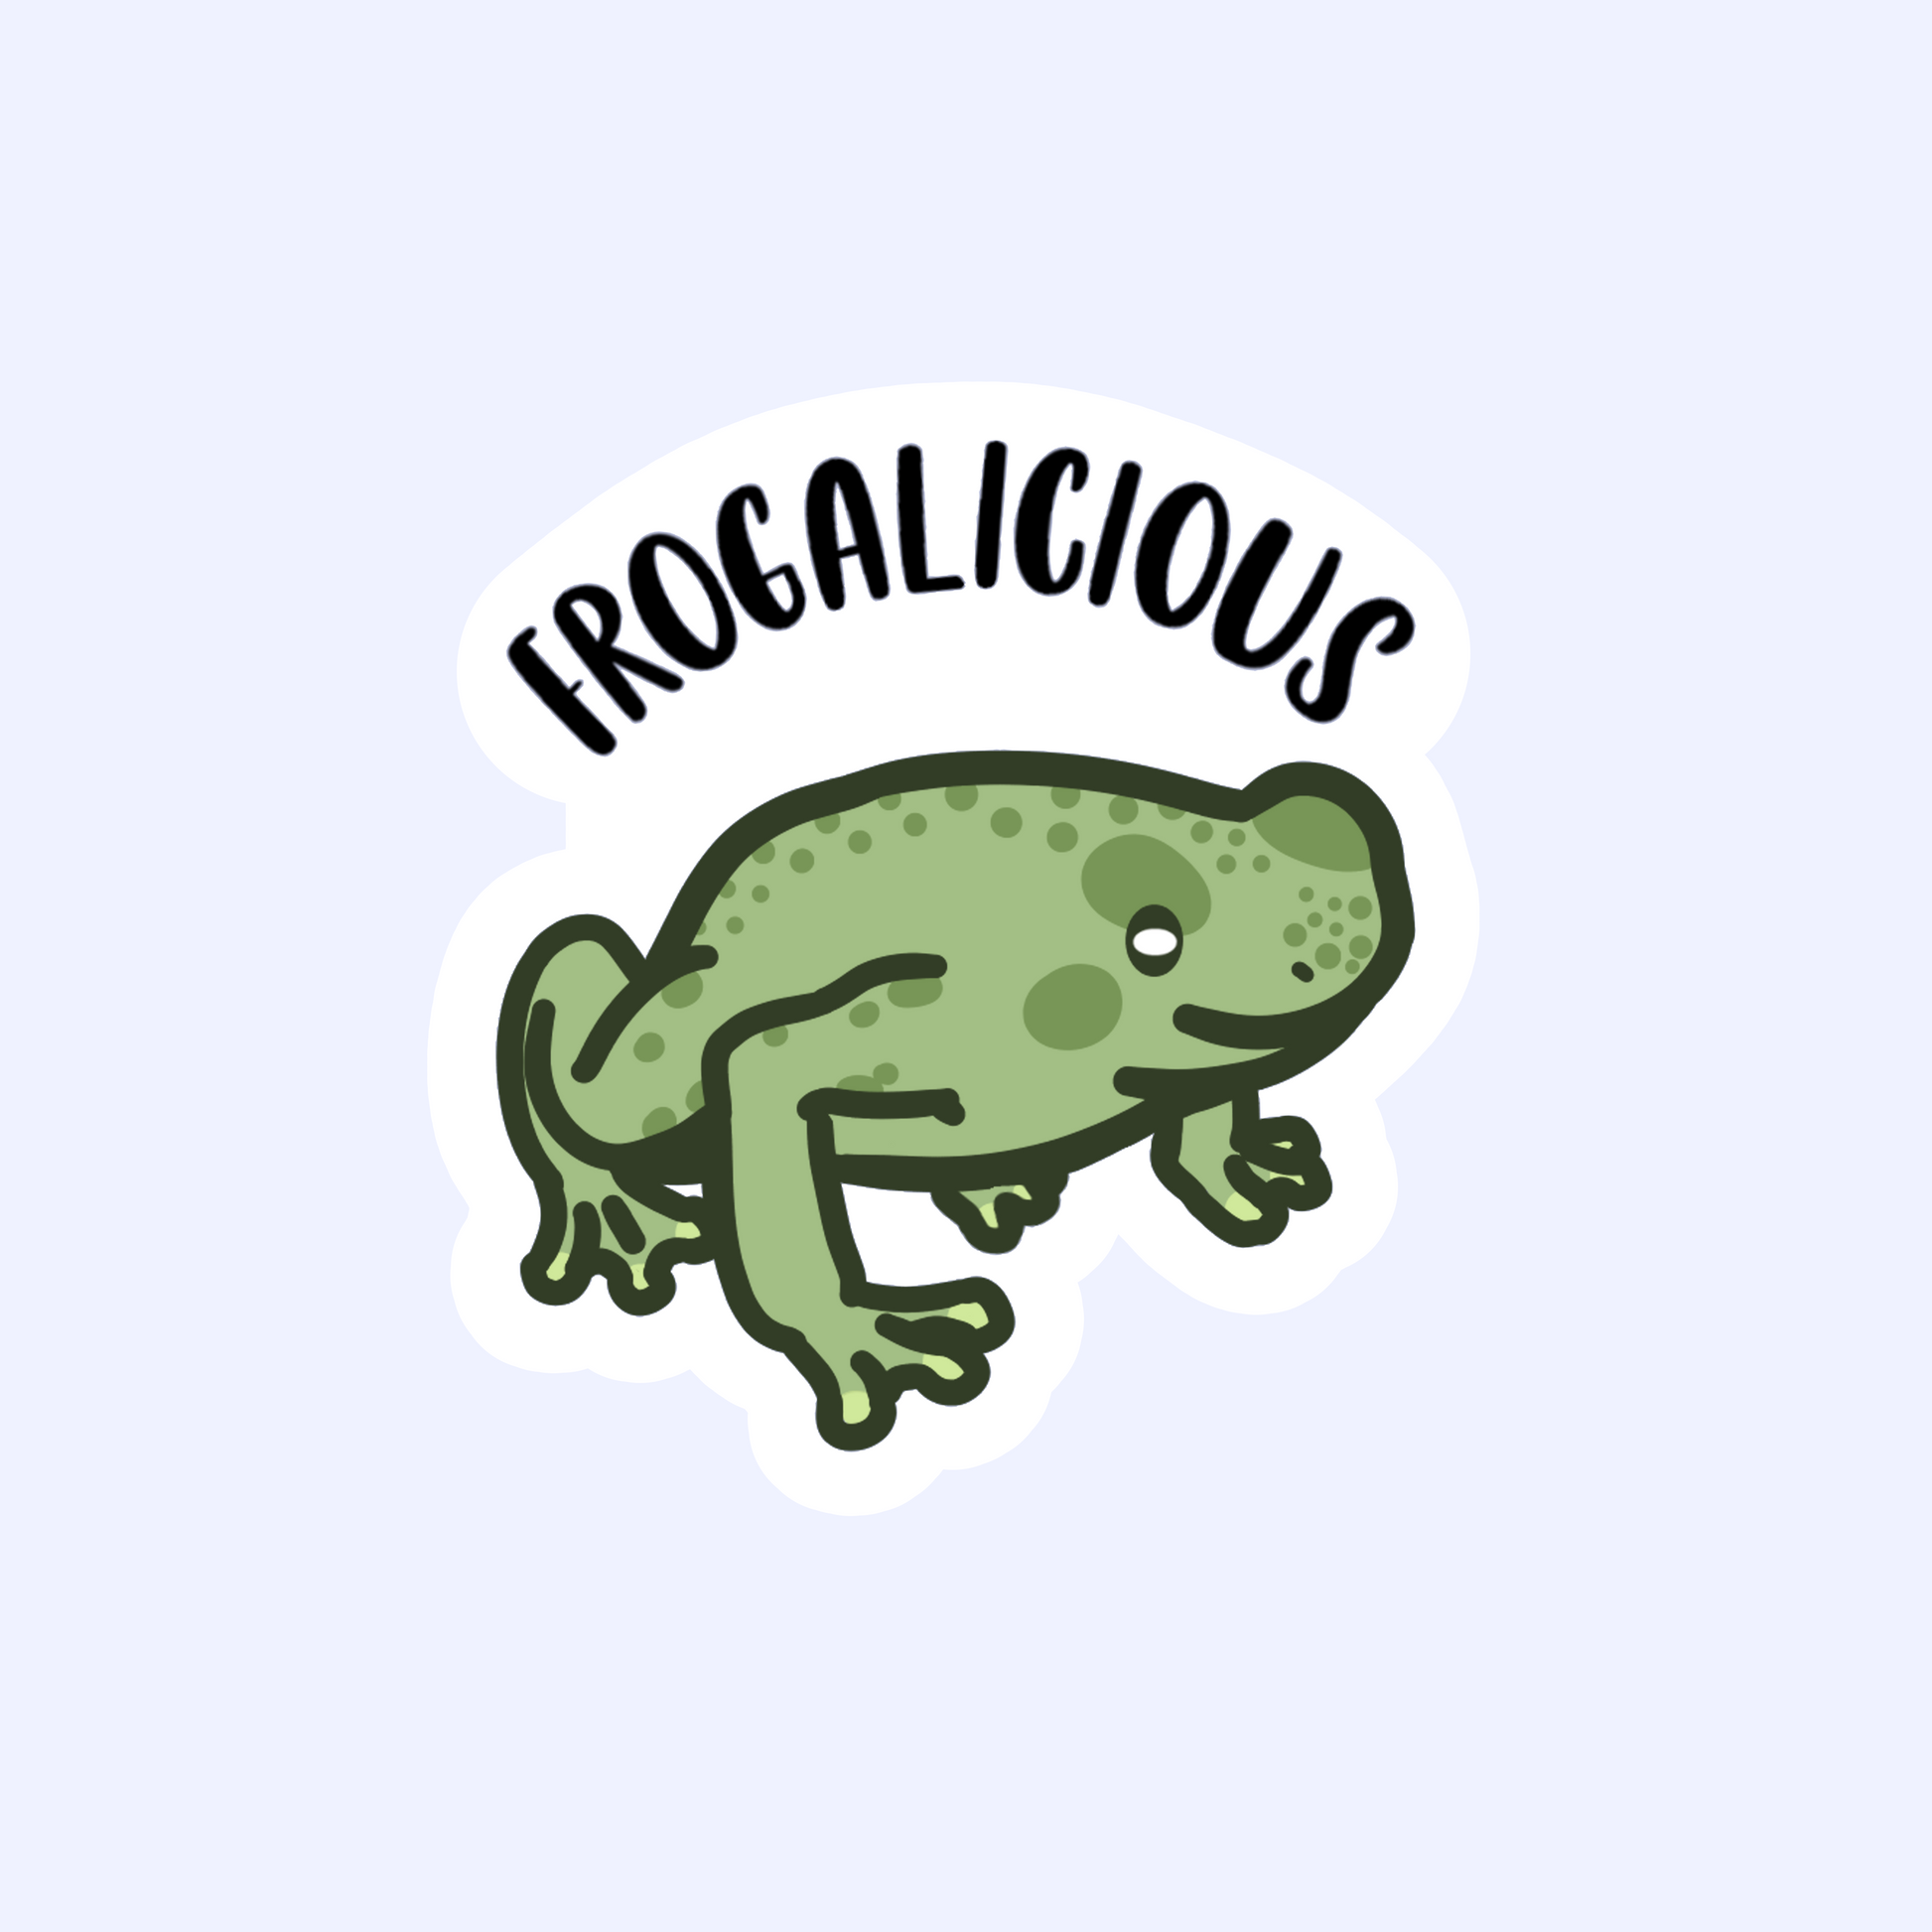 Funny Frog Sticker Collection - Funny 3 Amphibian Stickers